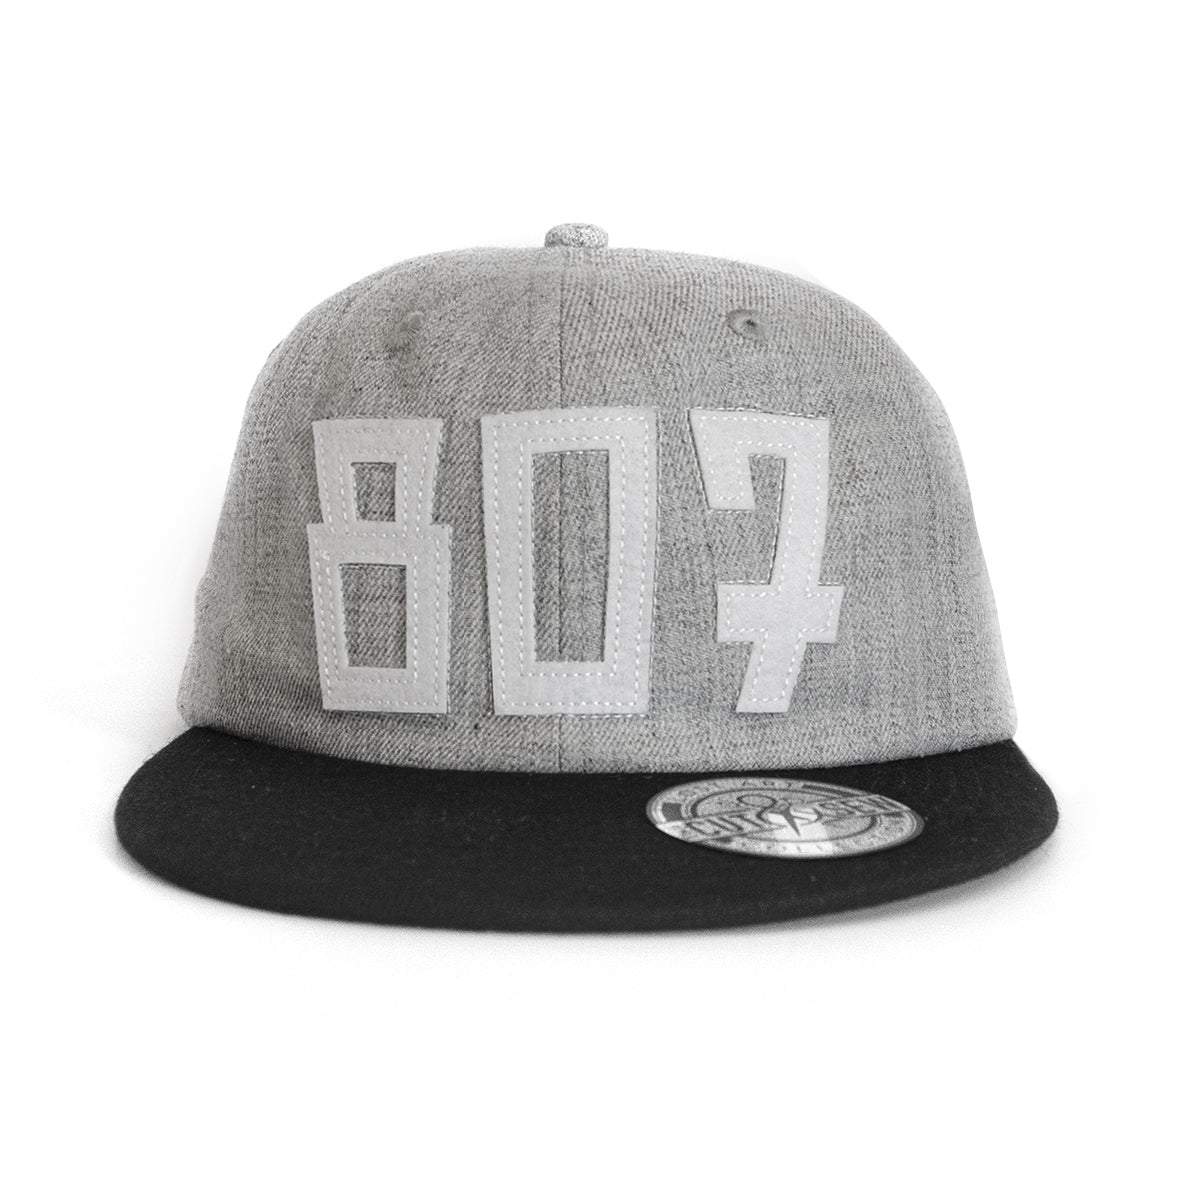 Lost Art Canada - white 807 grey wool mix snapback hat front view